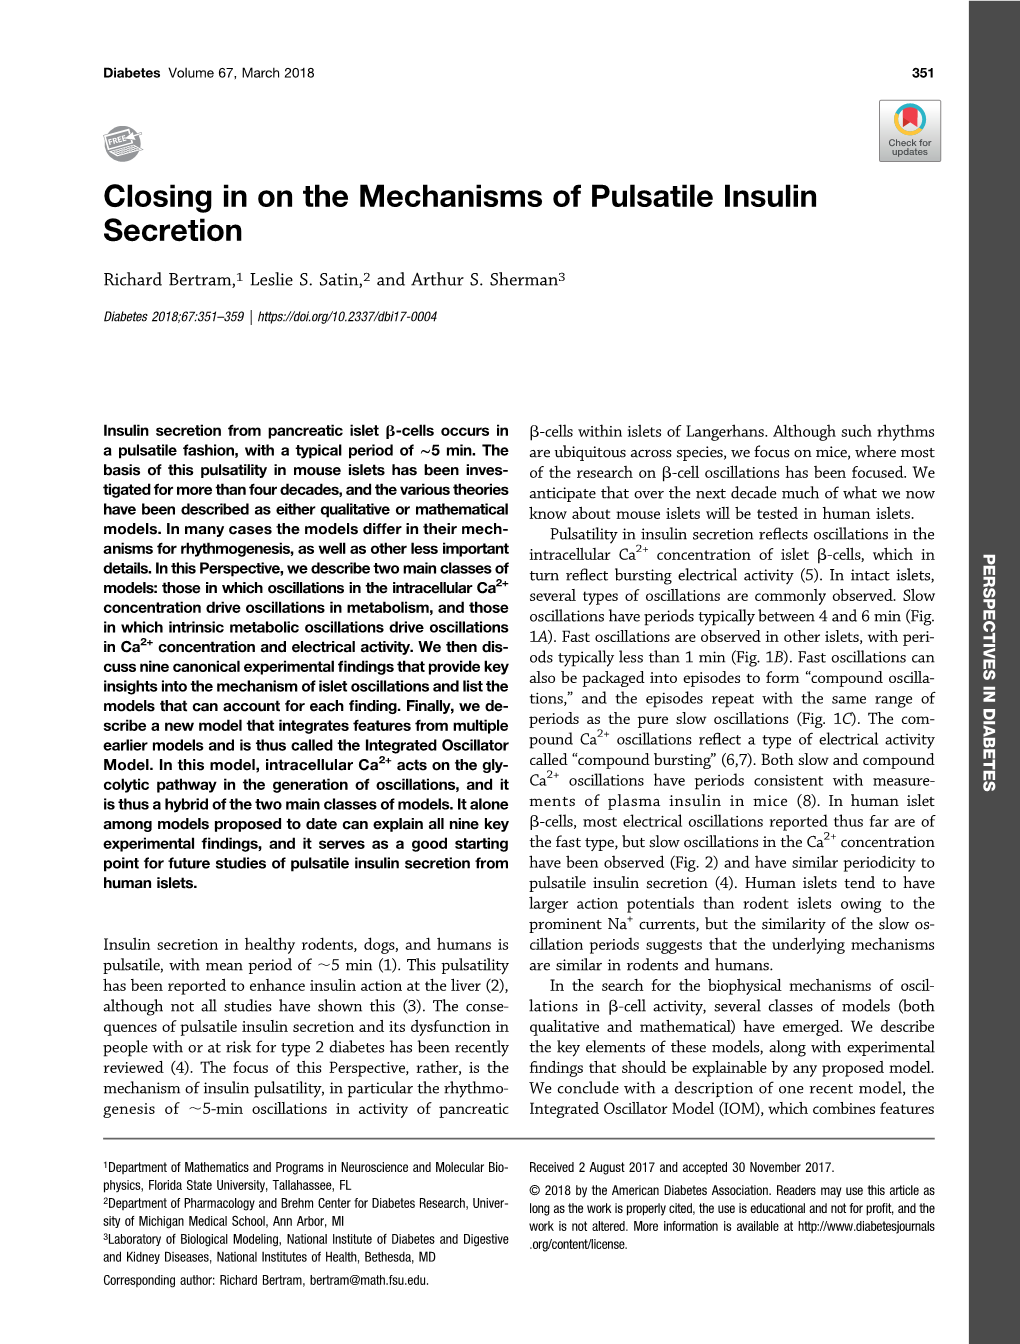 Closing in on the Mechanisms of Pulsatile Insulin Secretion